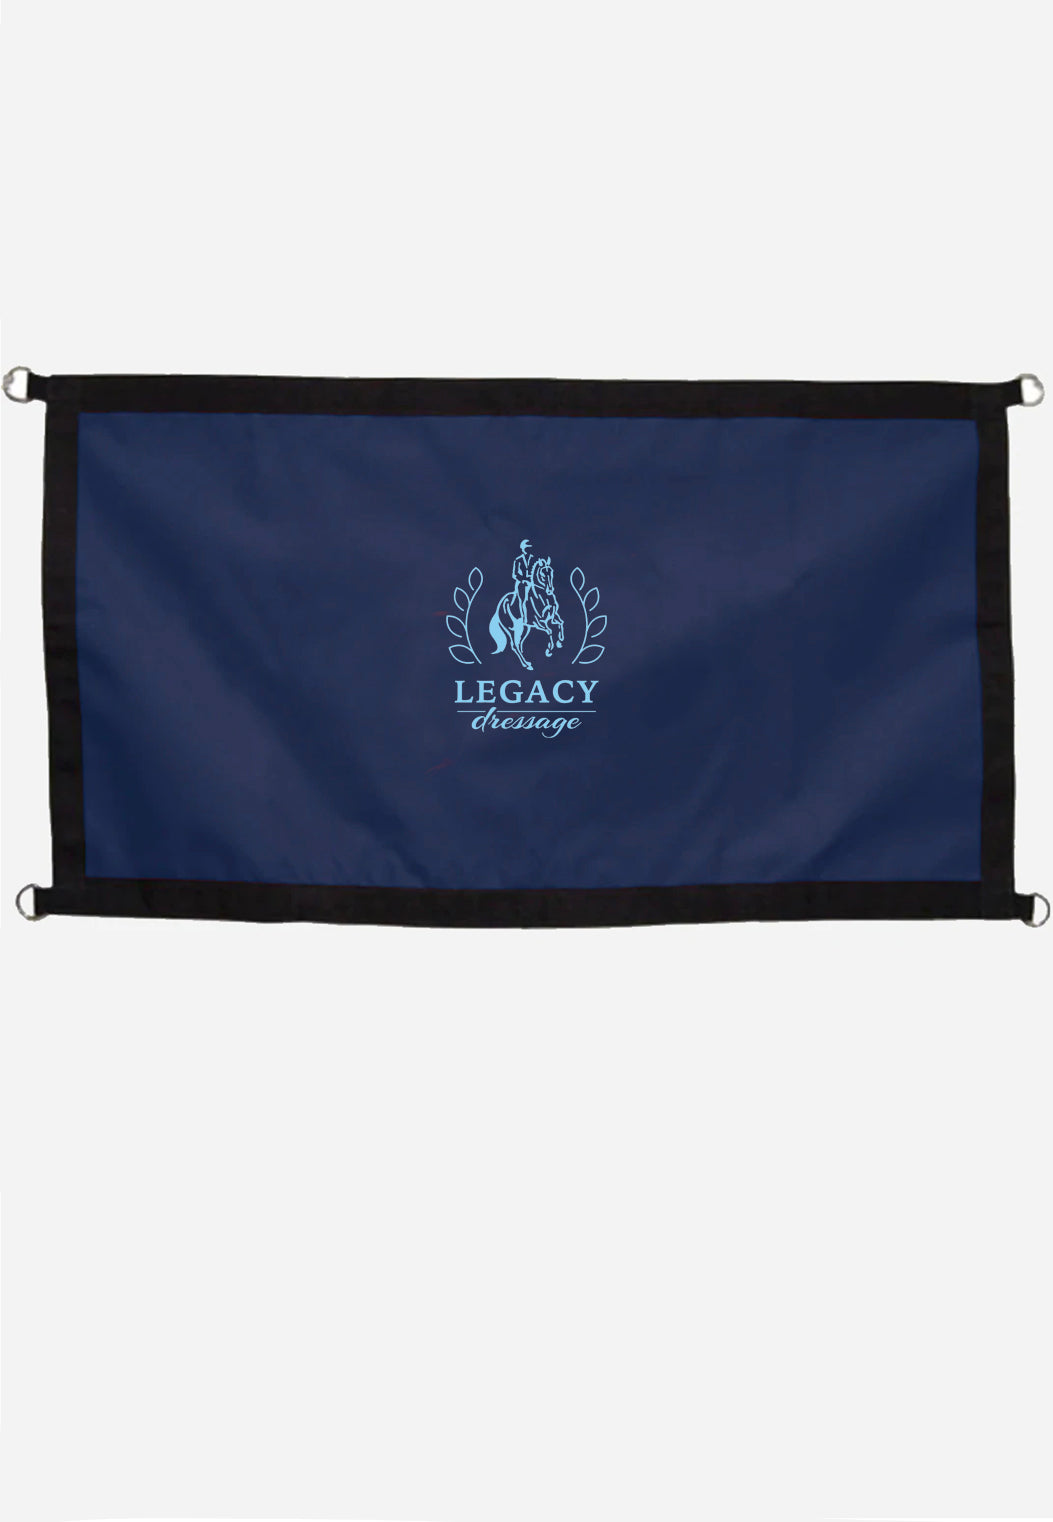 Legacy Dressage World Class Equine Stall Guard - Navy